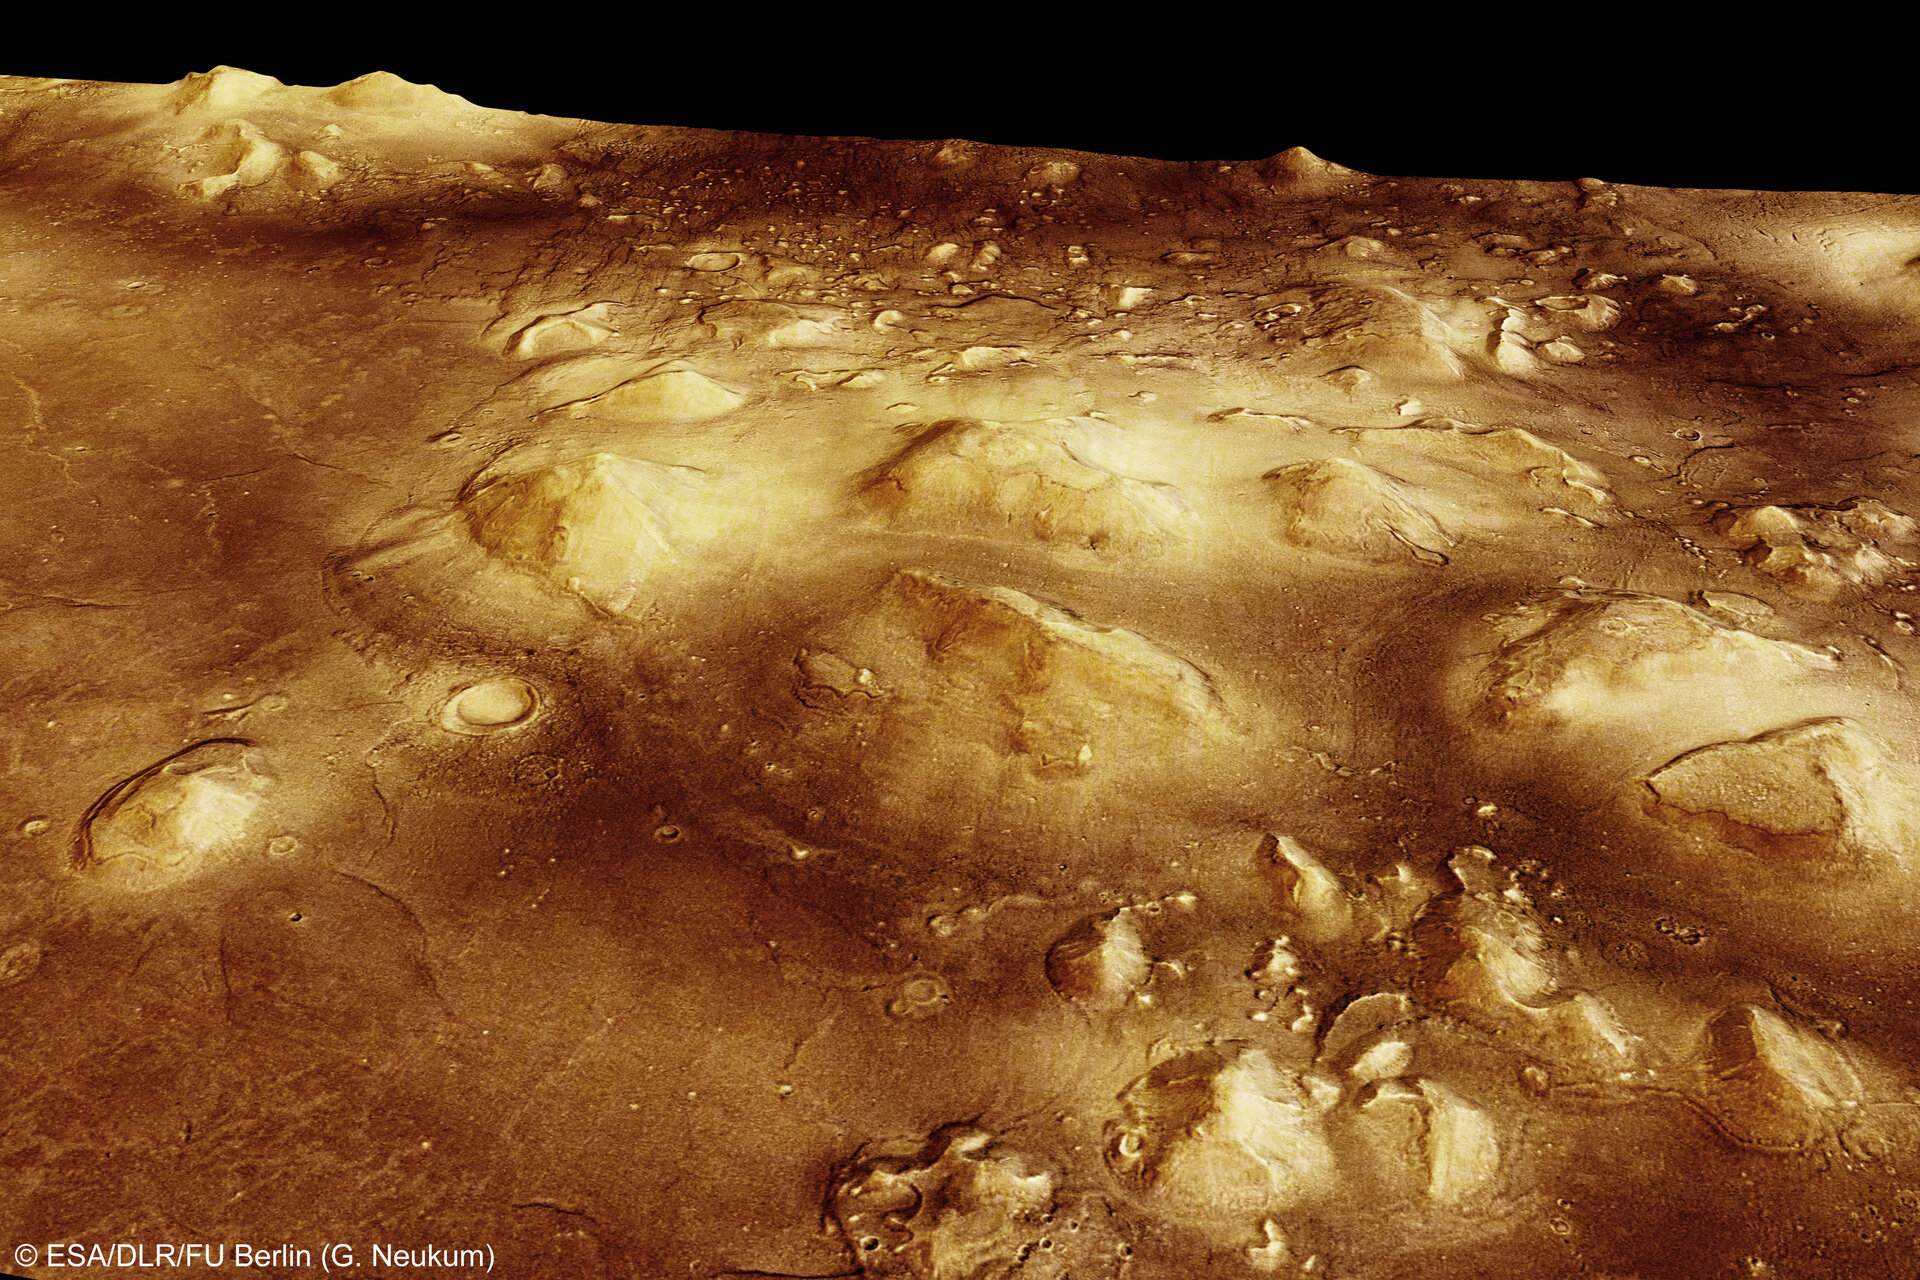 'Pyramids and Skull' in Cydonia region, perspective